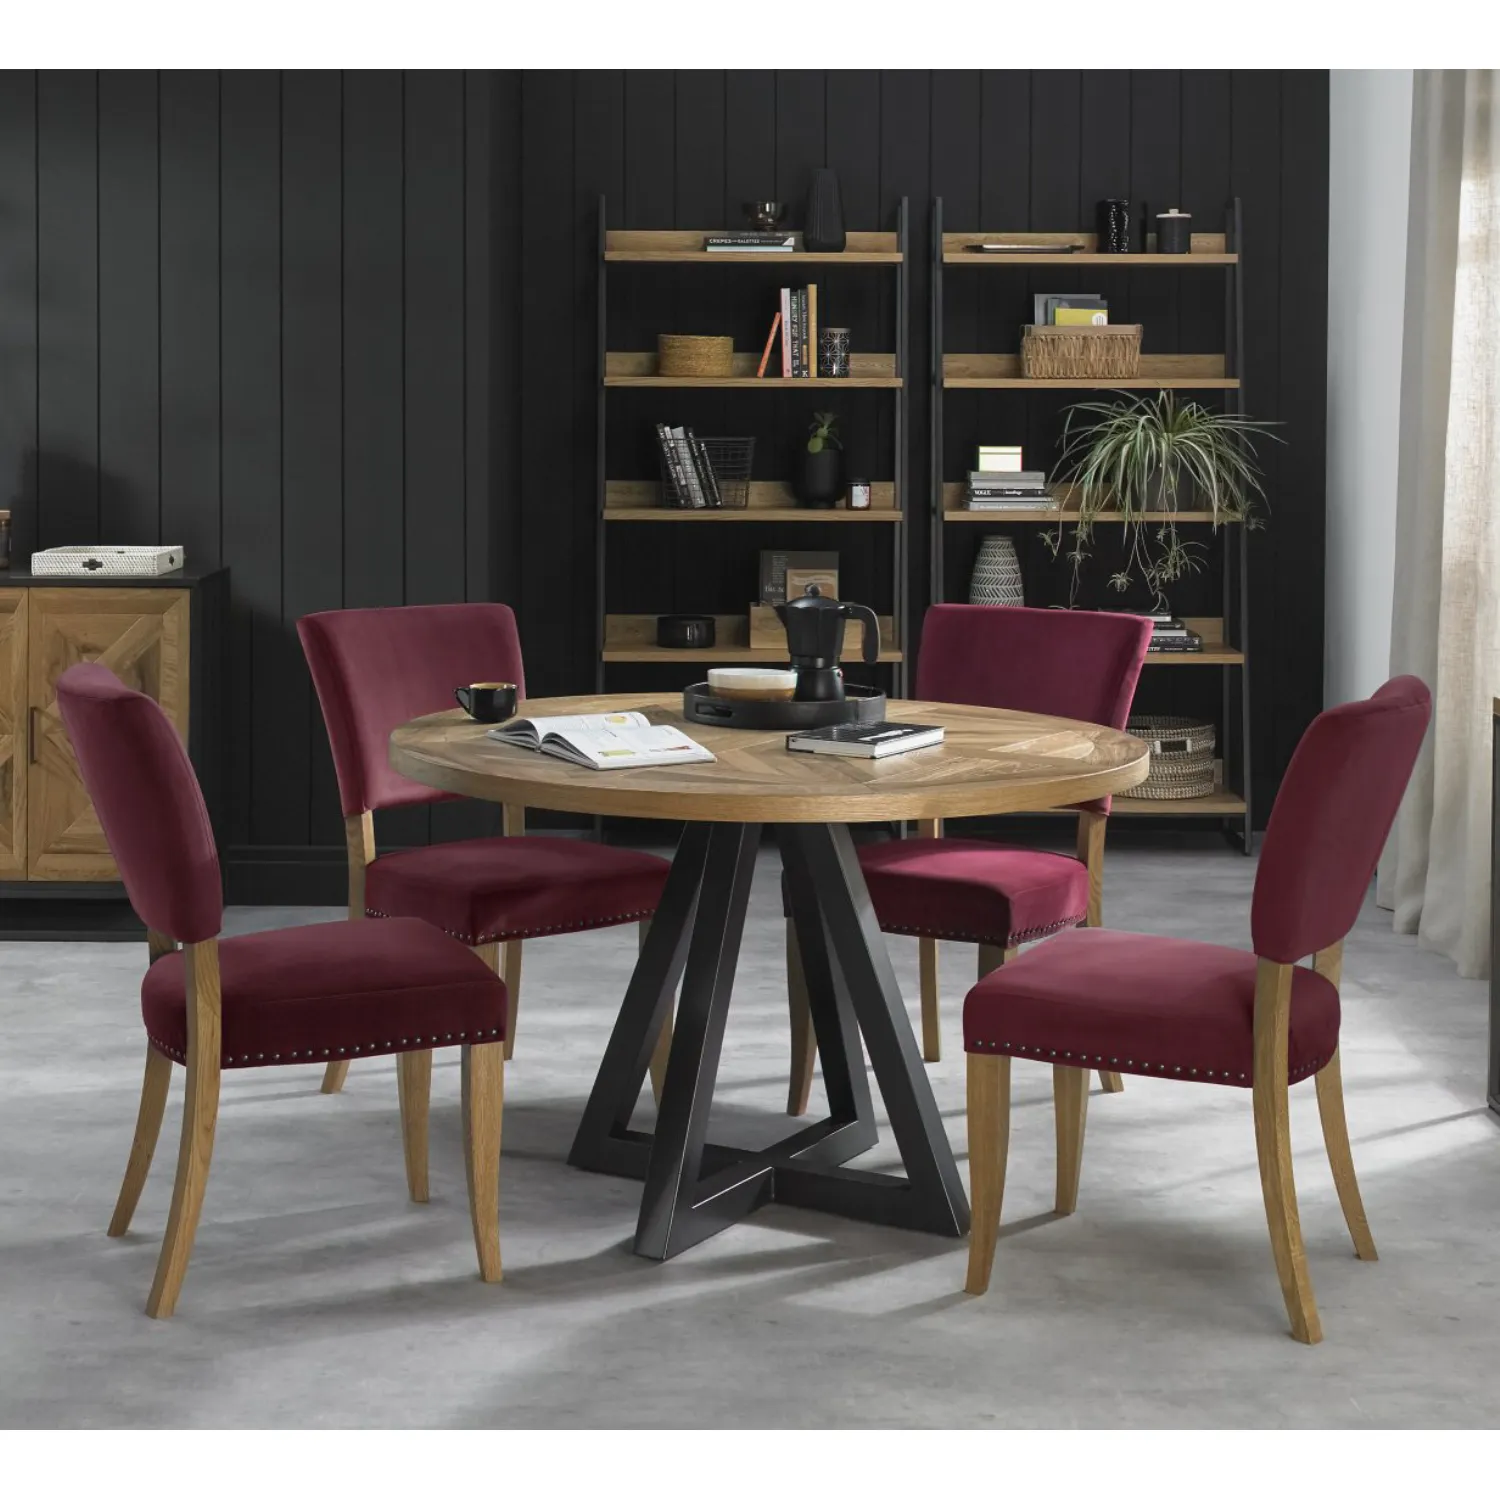 Rustic Oak Round Dining Table Set 4 Red Velvet Chairs